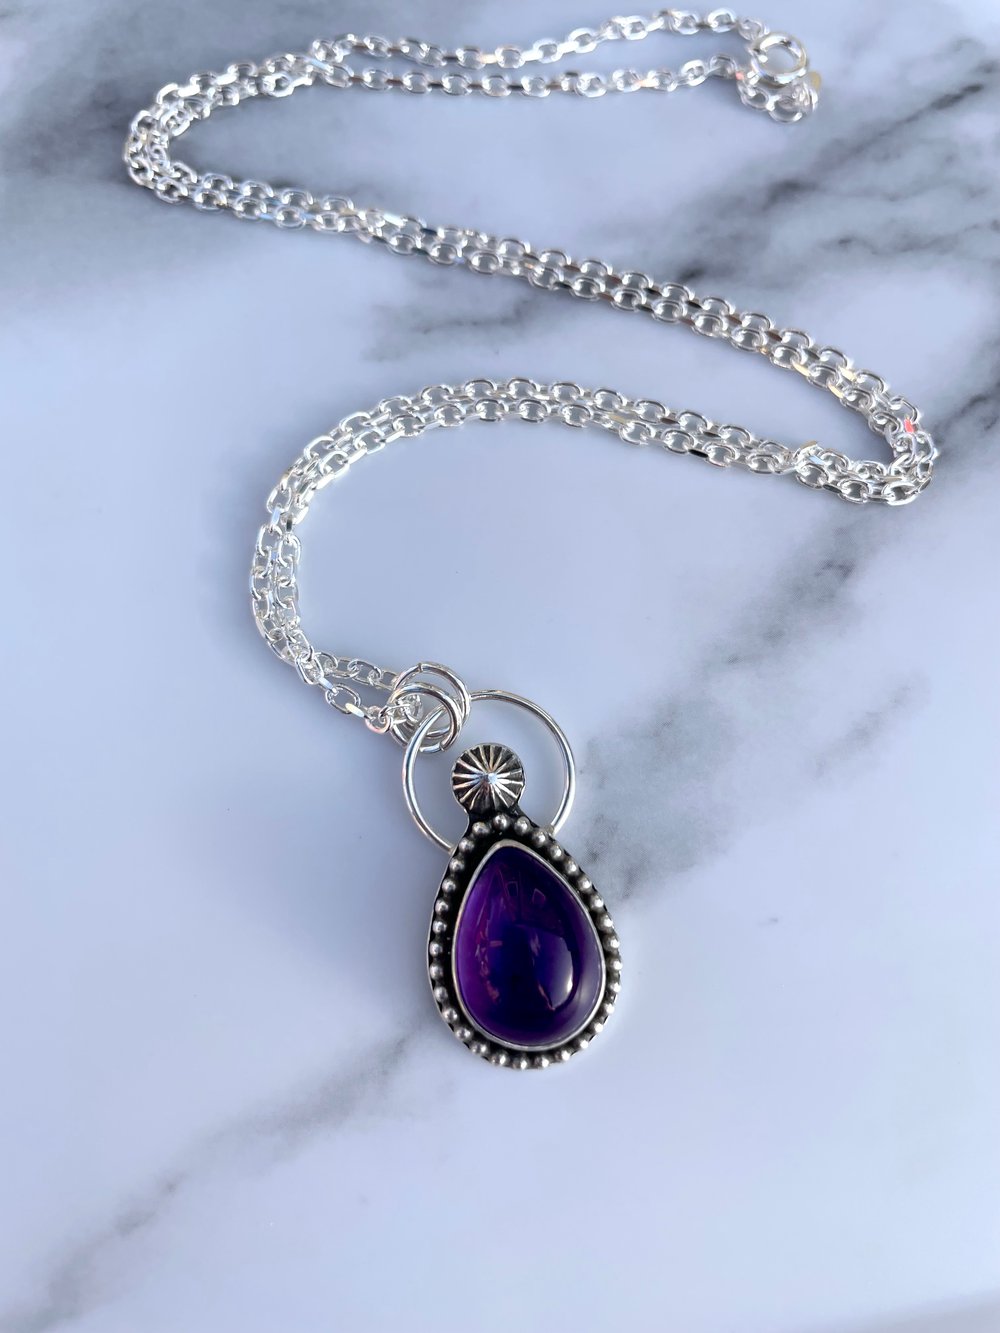 Handmade Sterling Silver Amethyst Pendant With Concho